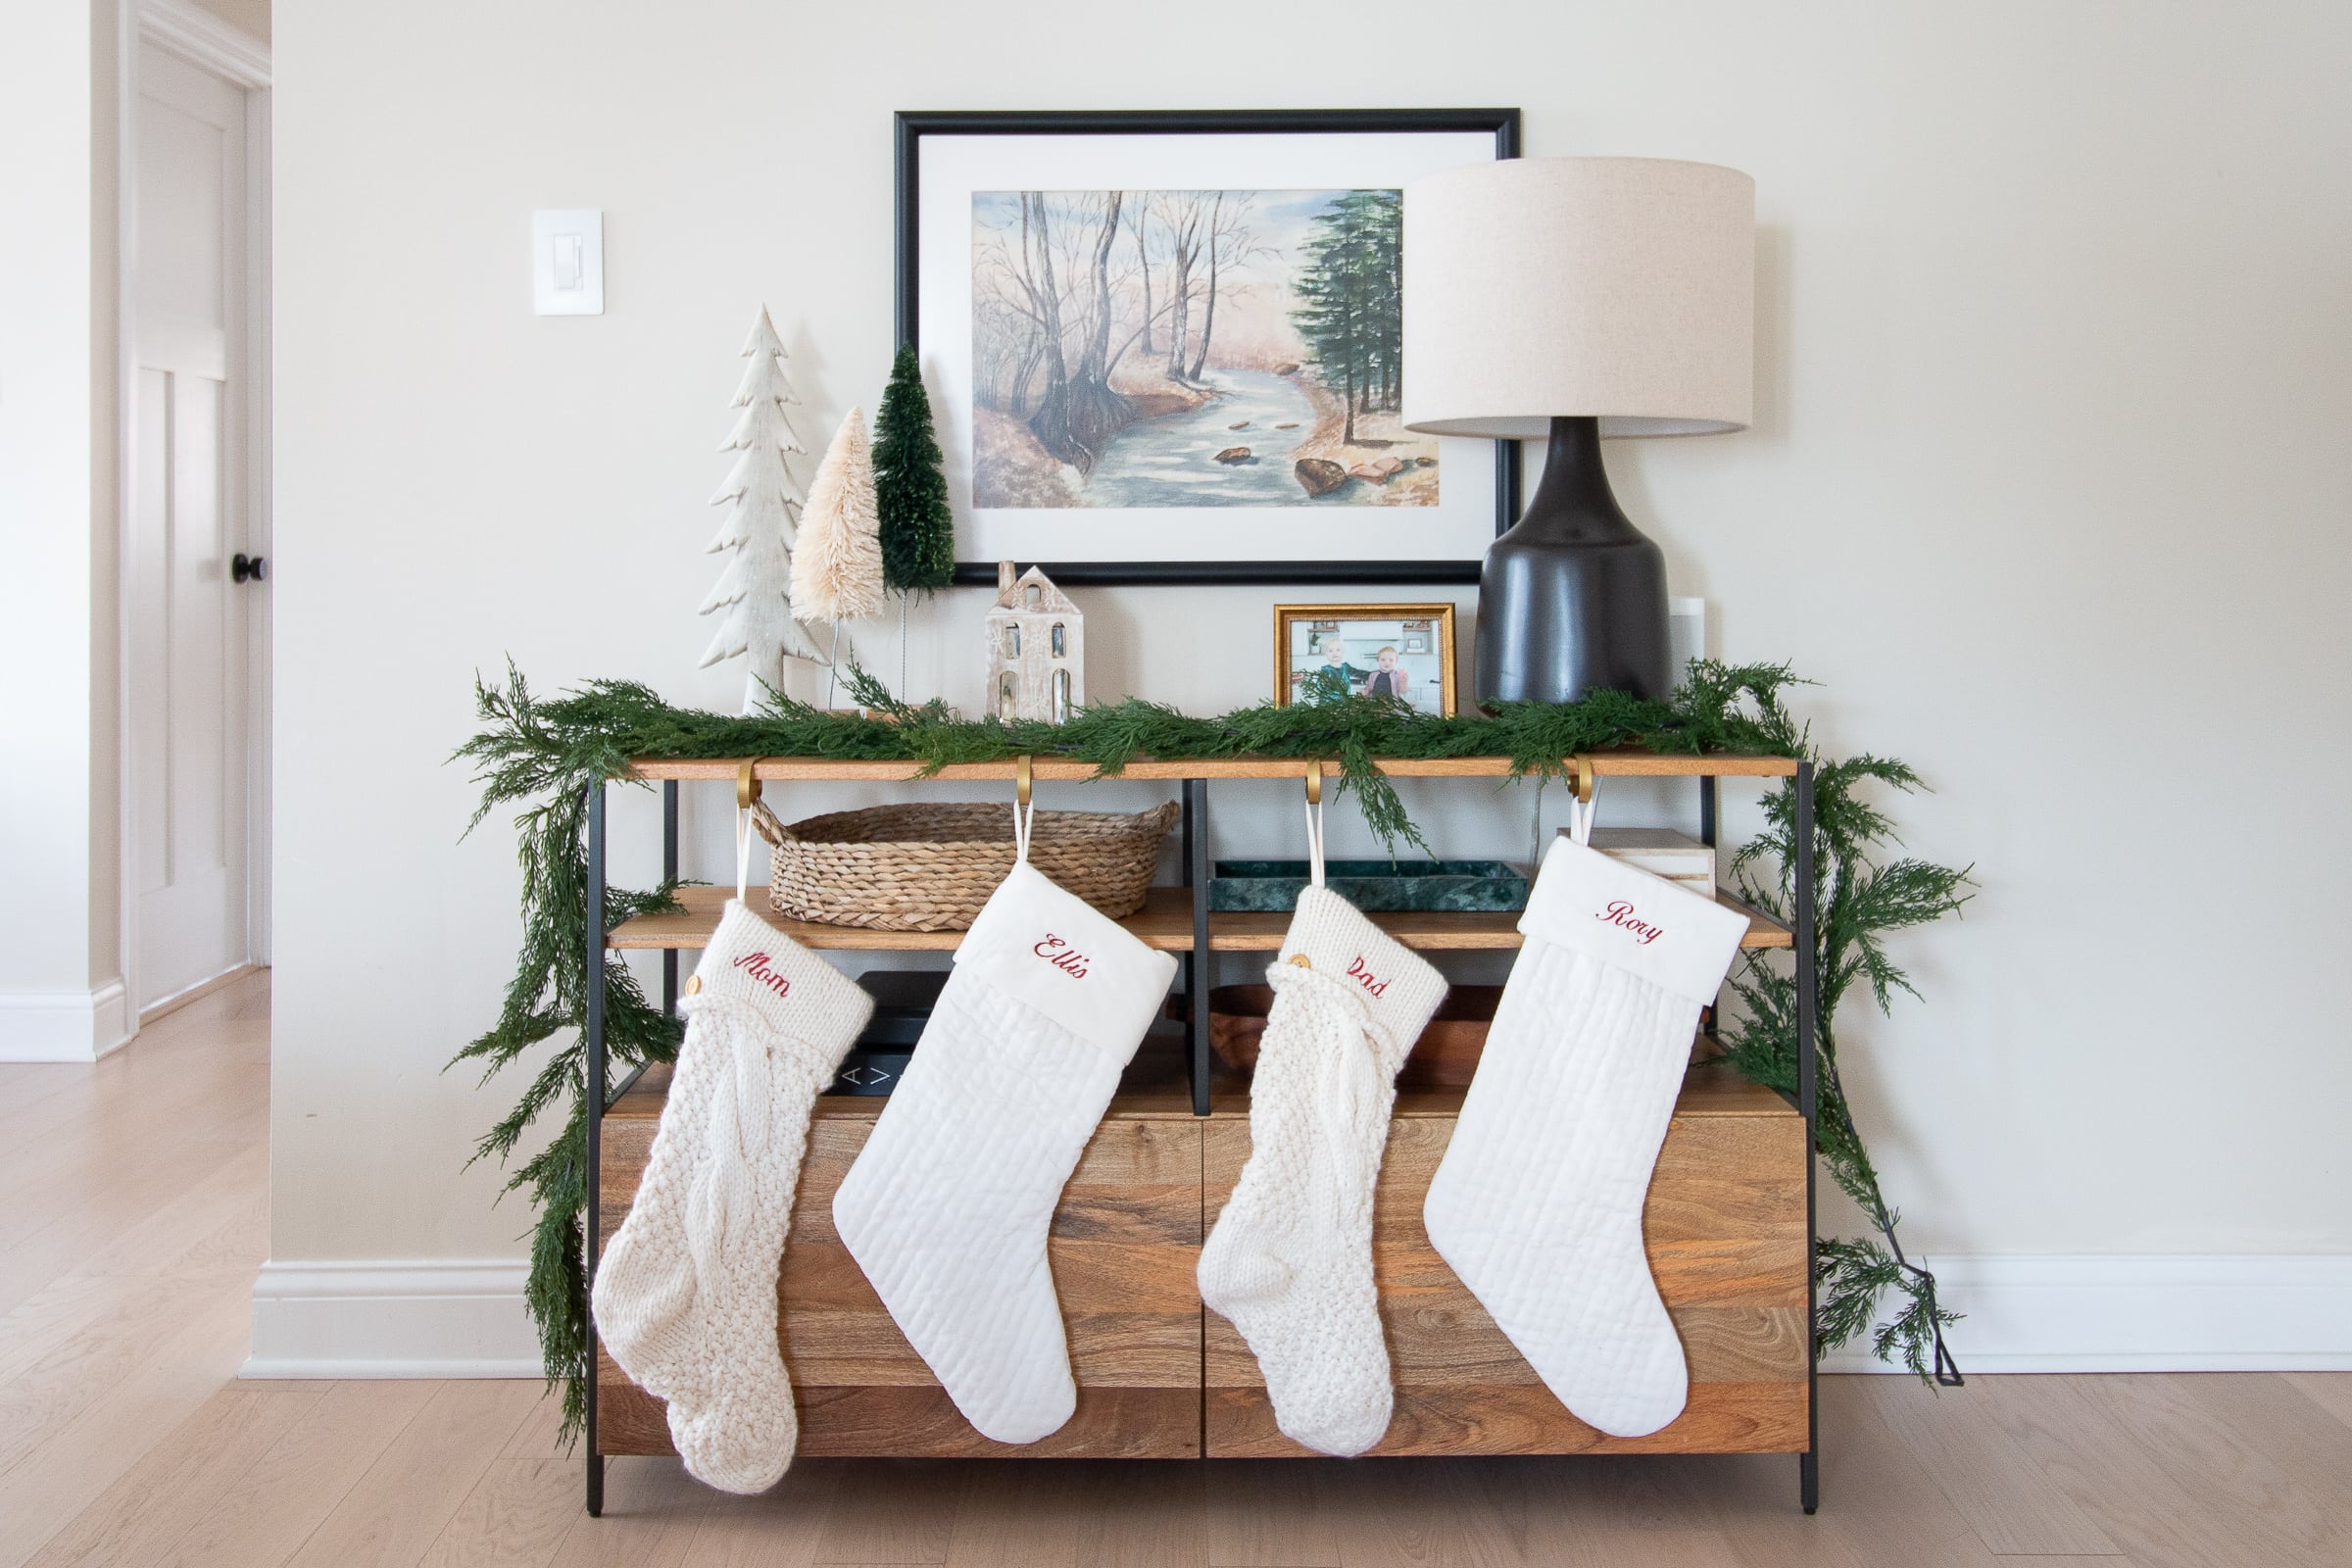 Our front entryway in our simple holiday home tour